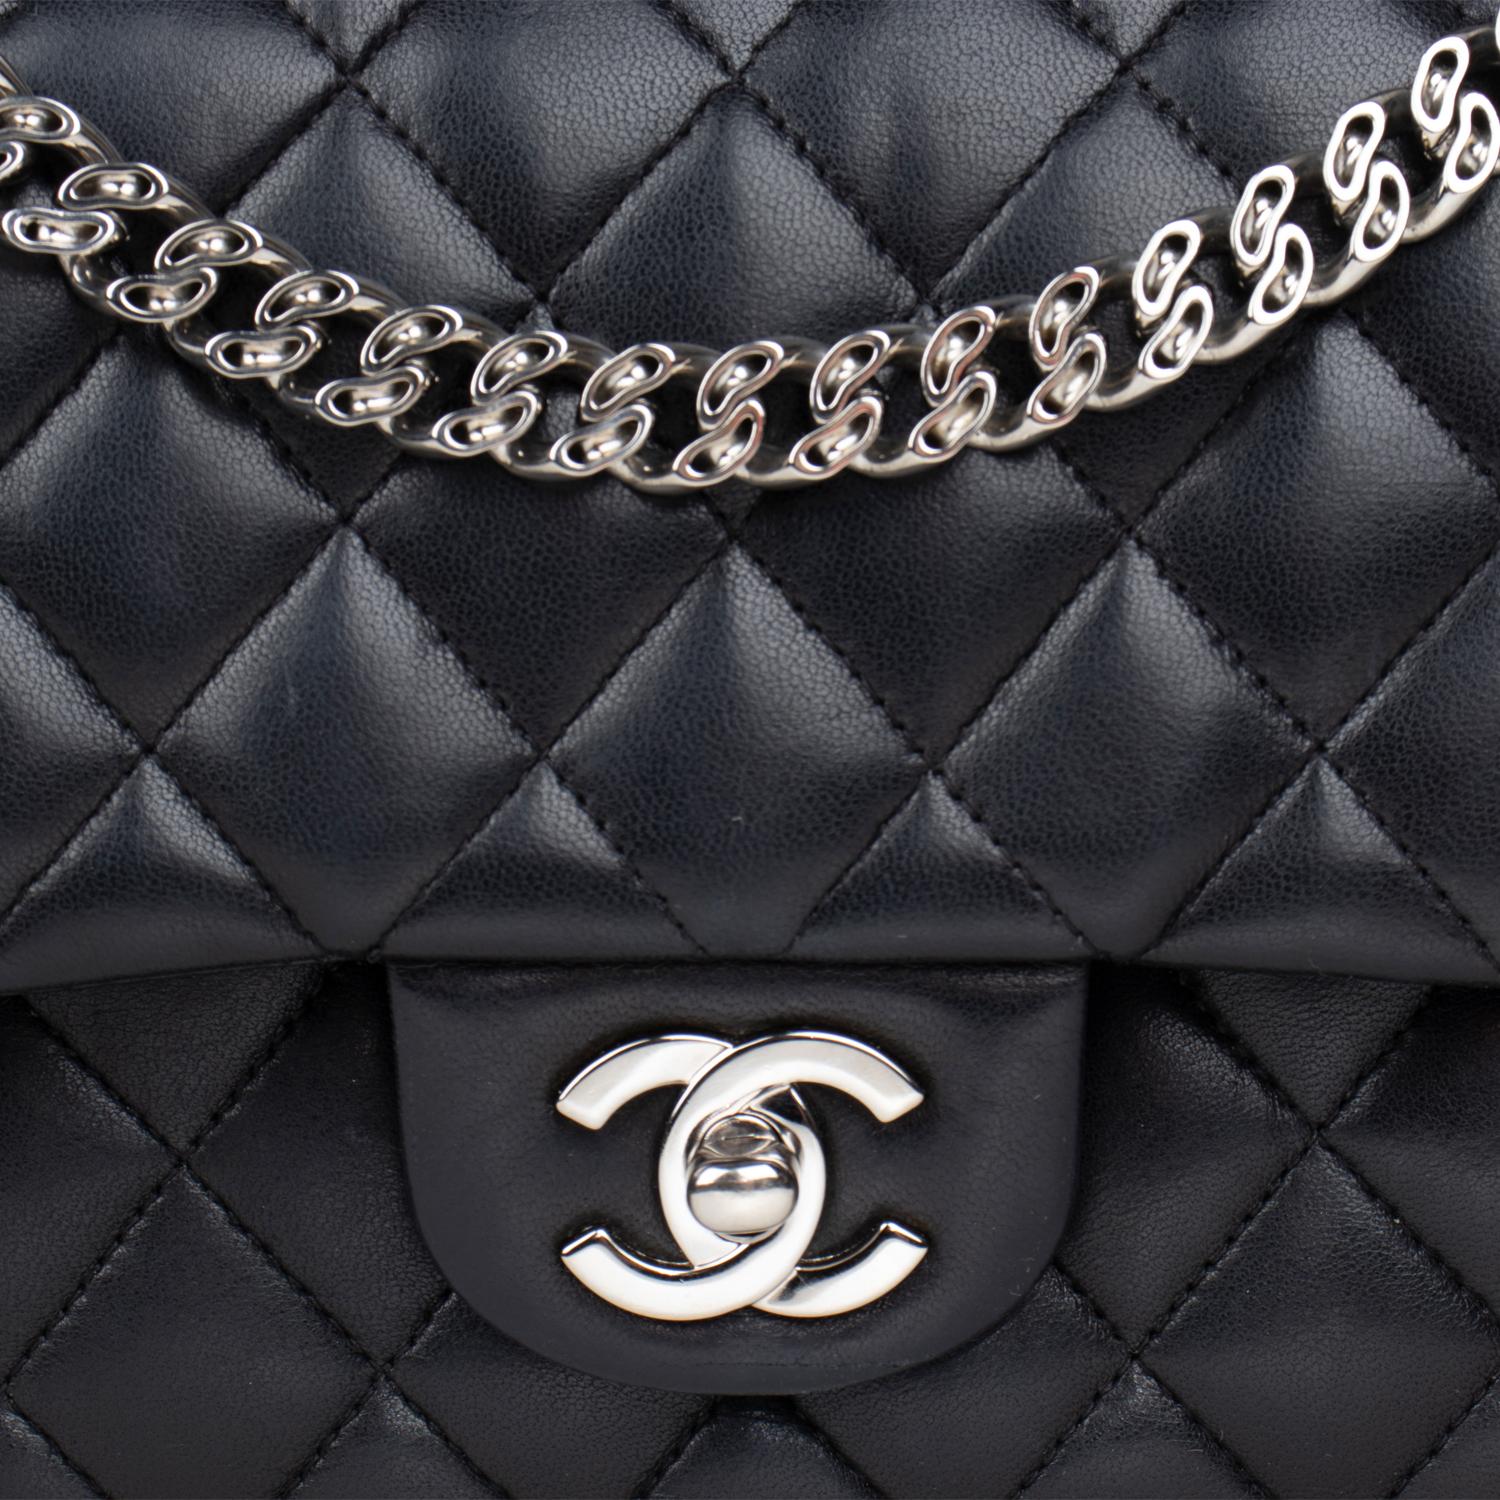 Chanel Medium Bijoux Chain Classic Double Flap Bag In Good Condition For Sale In Sundbyberg, SE